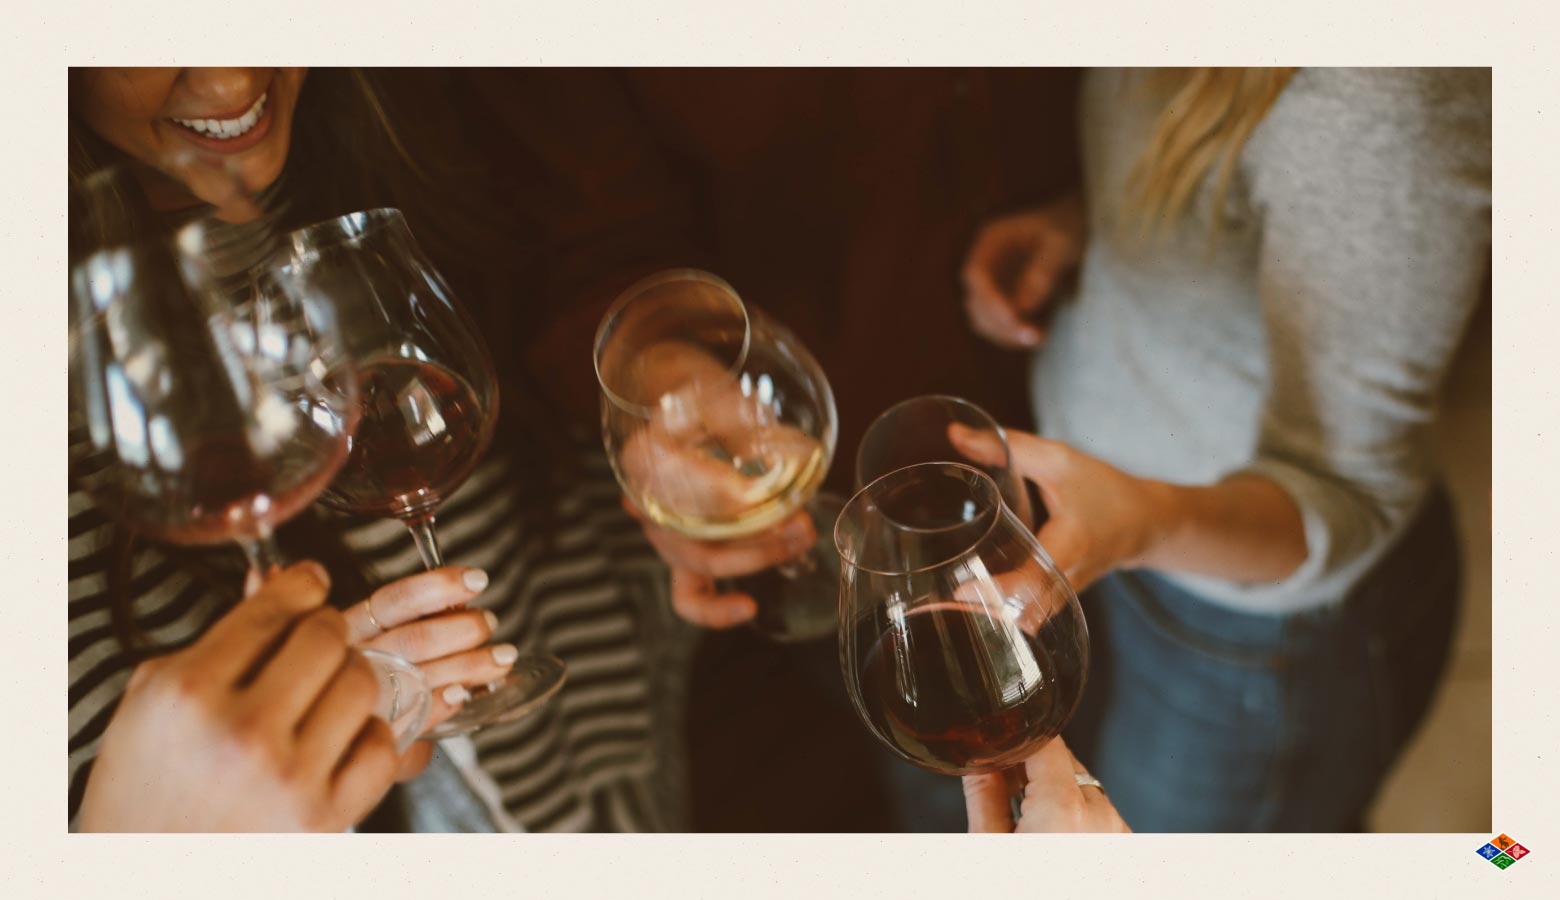 Gatlinburg has a ton of great wineries and distilleries available for bachelorette parties.